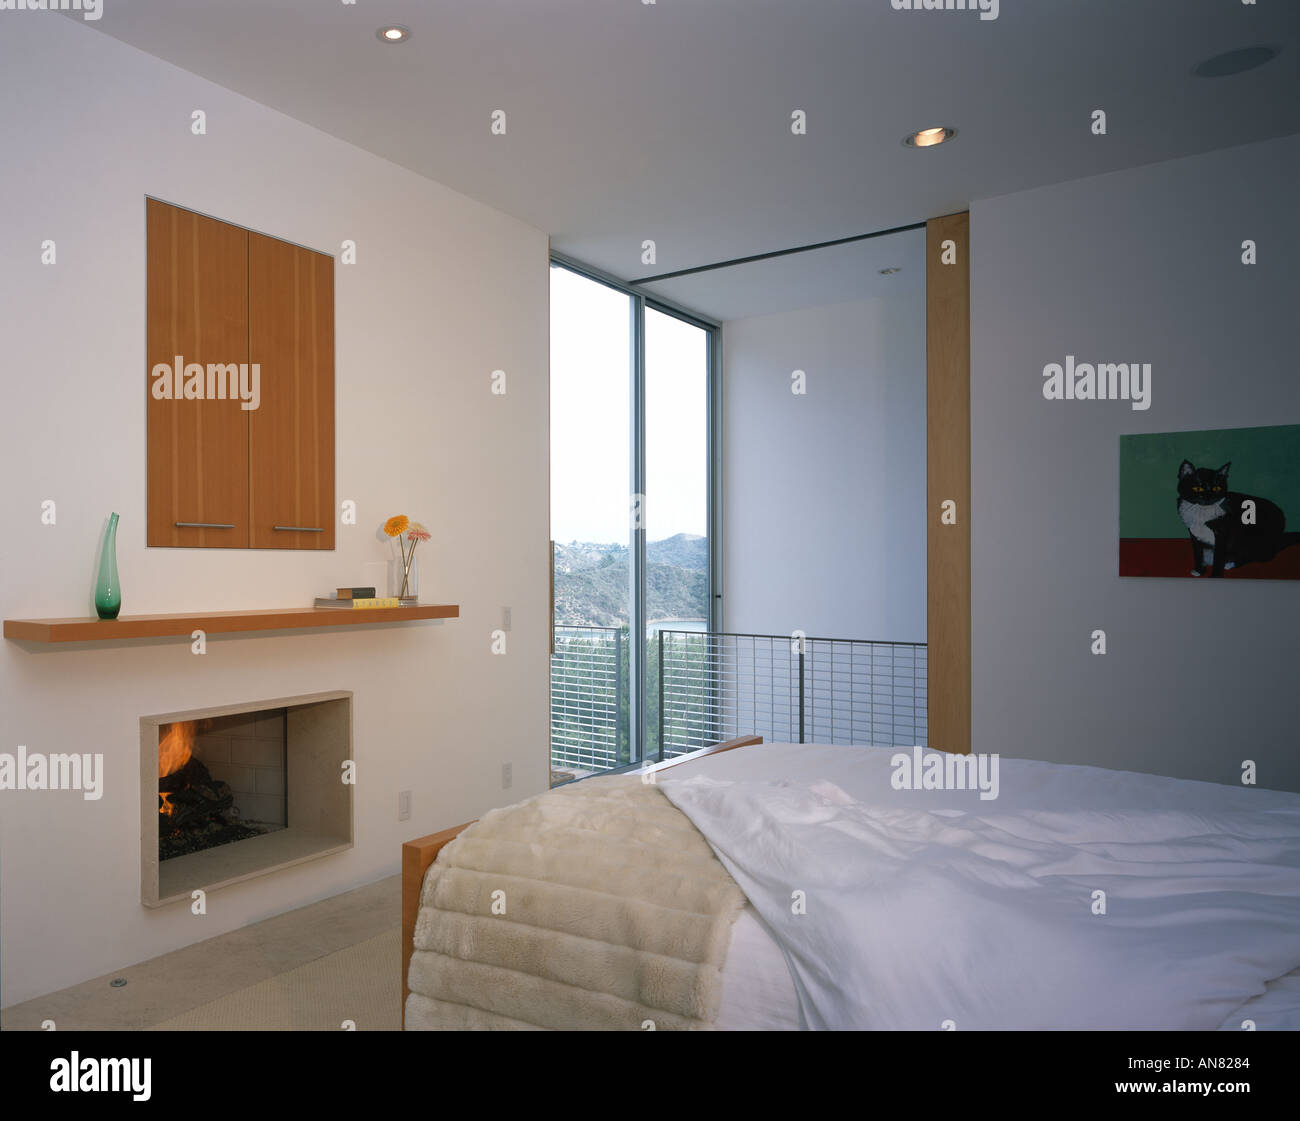 Oshry Residence, Bel Air, California. Bedroom with fireplace. Architect: SPF Architects Stock Photo